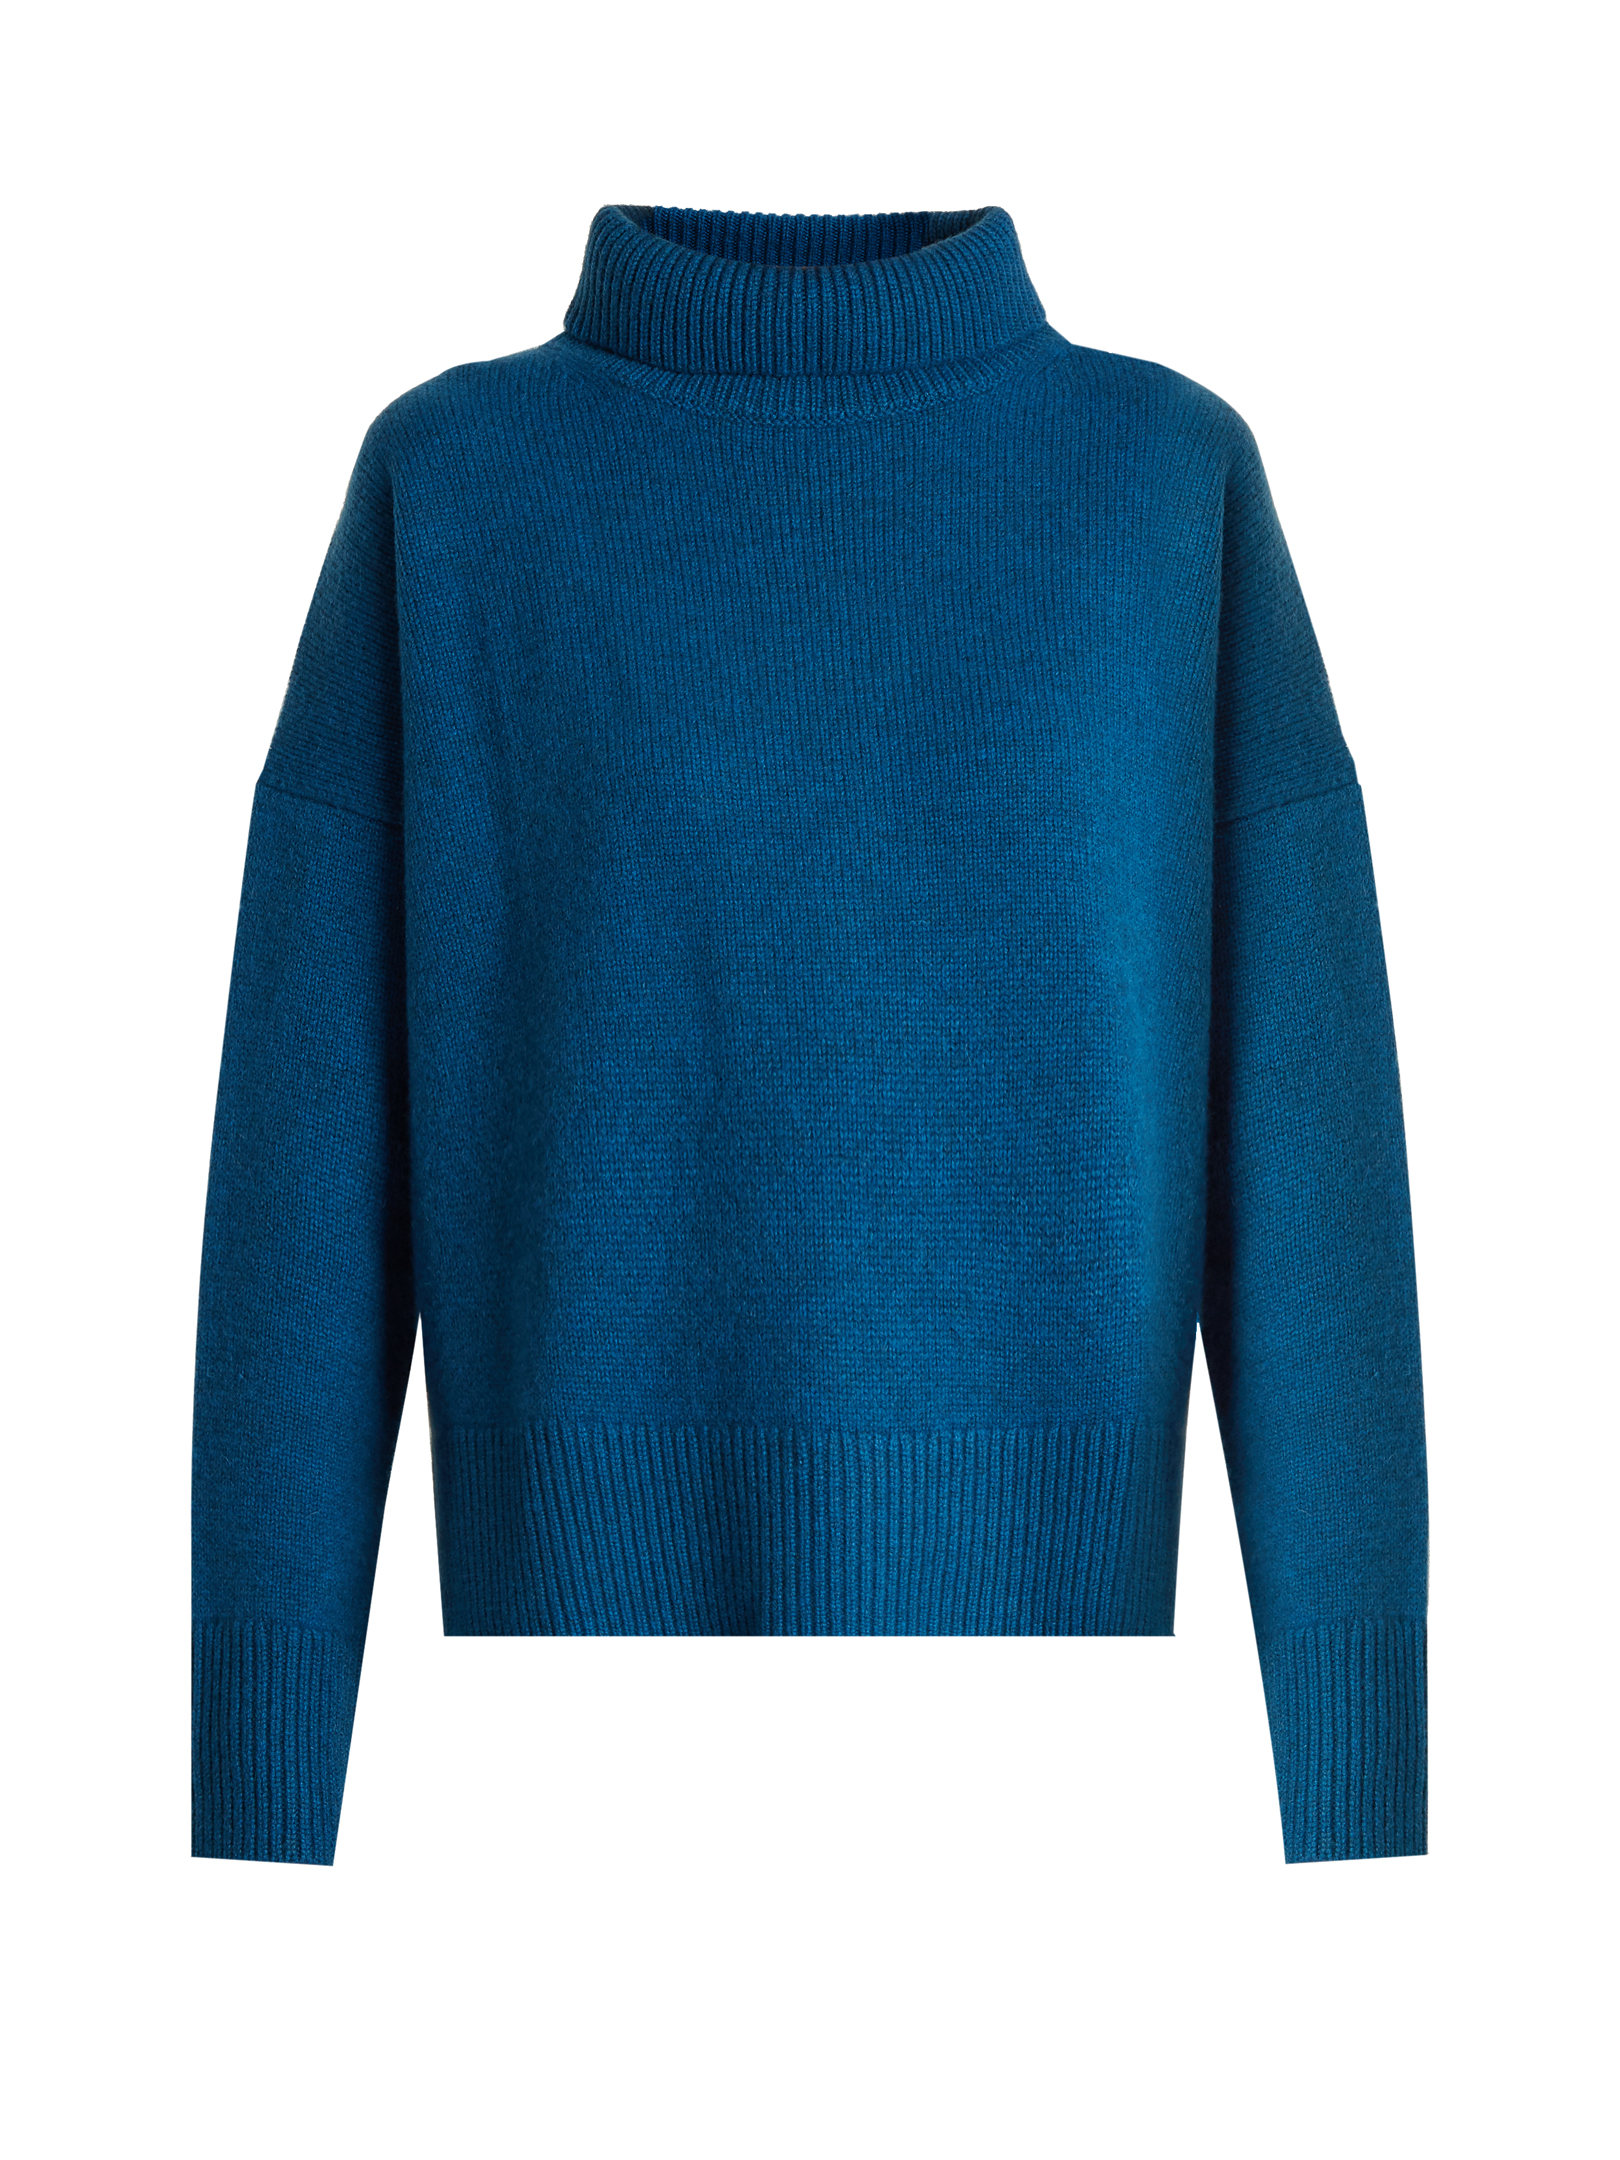 Vanessa Bruno - Henriqua Roll-Neck Wool-Blend Sweater | ABOUT ICONS